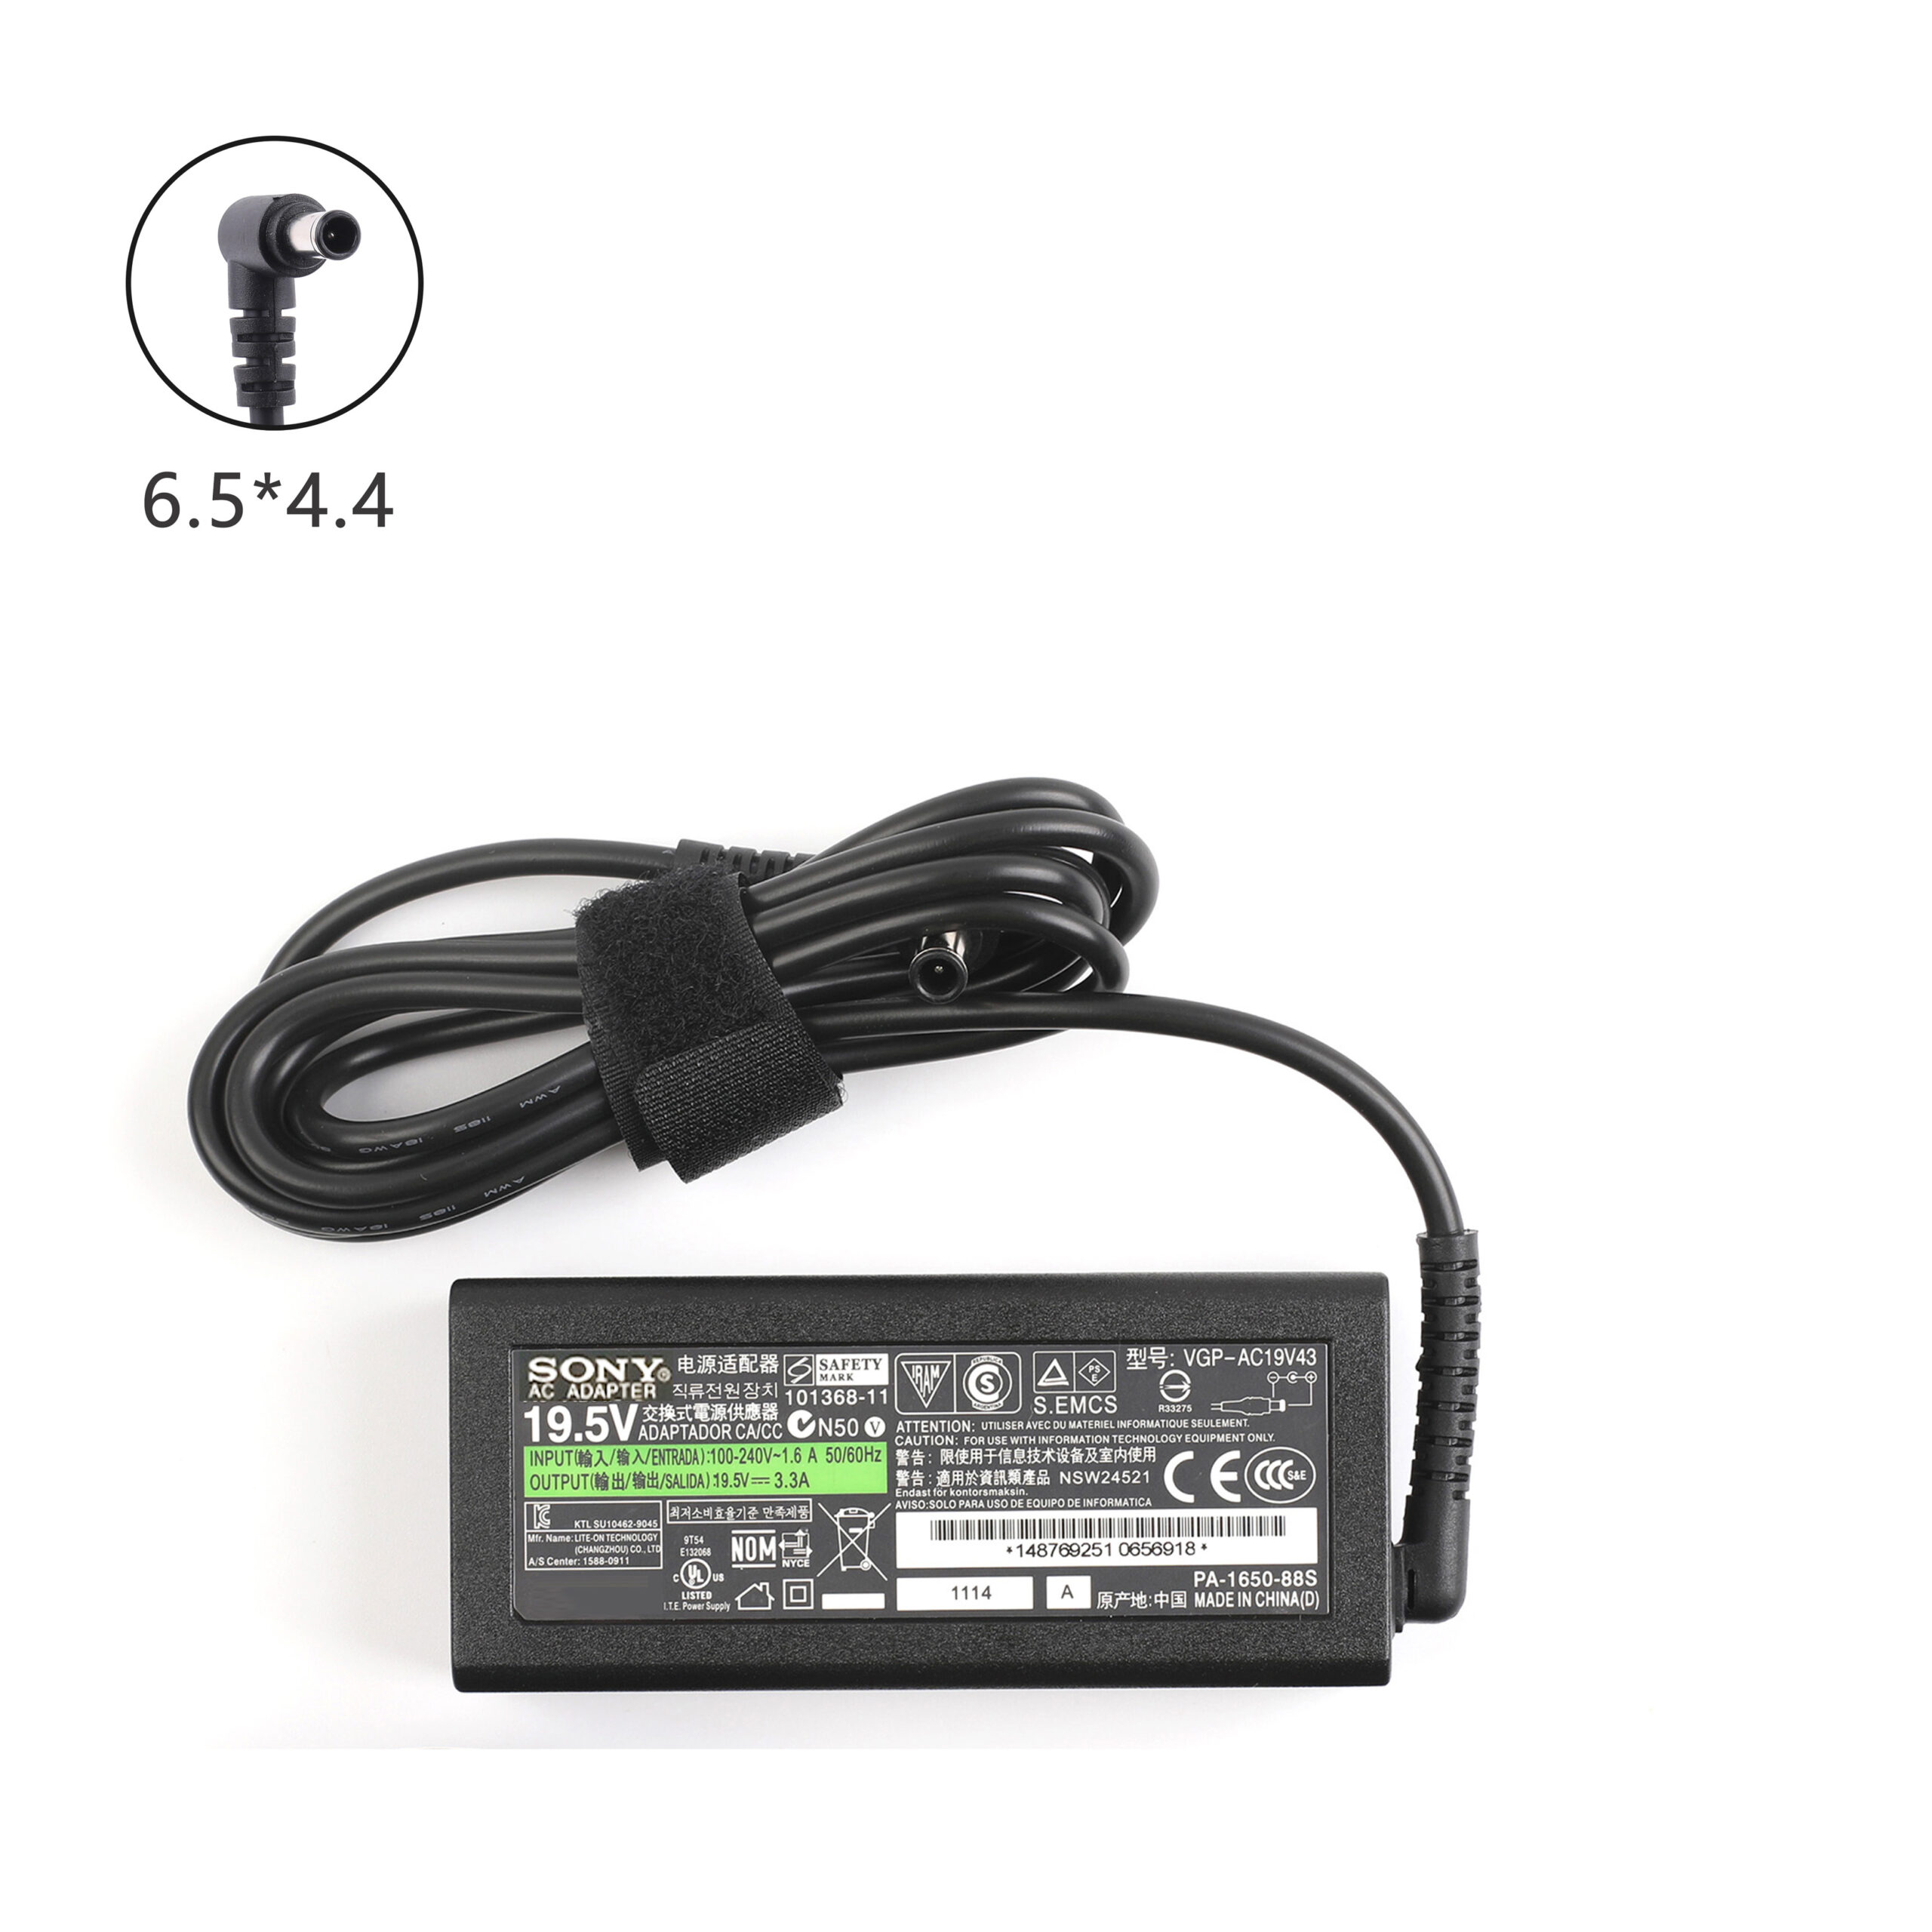 Sony Vaio VPCM13M1E/W VPCM11M1E/W AC Adapter Charger